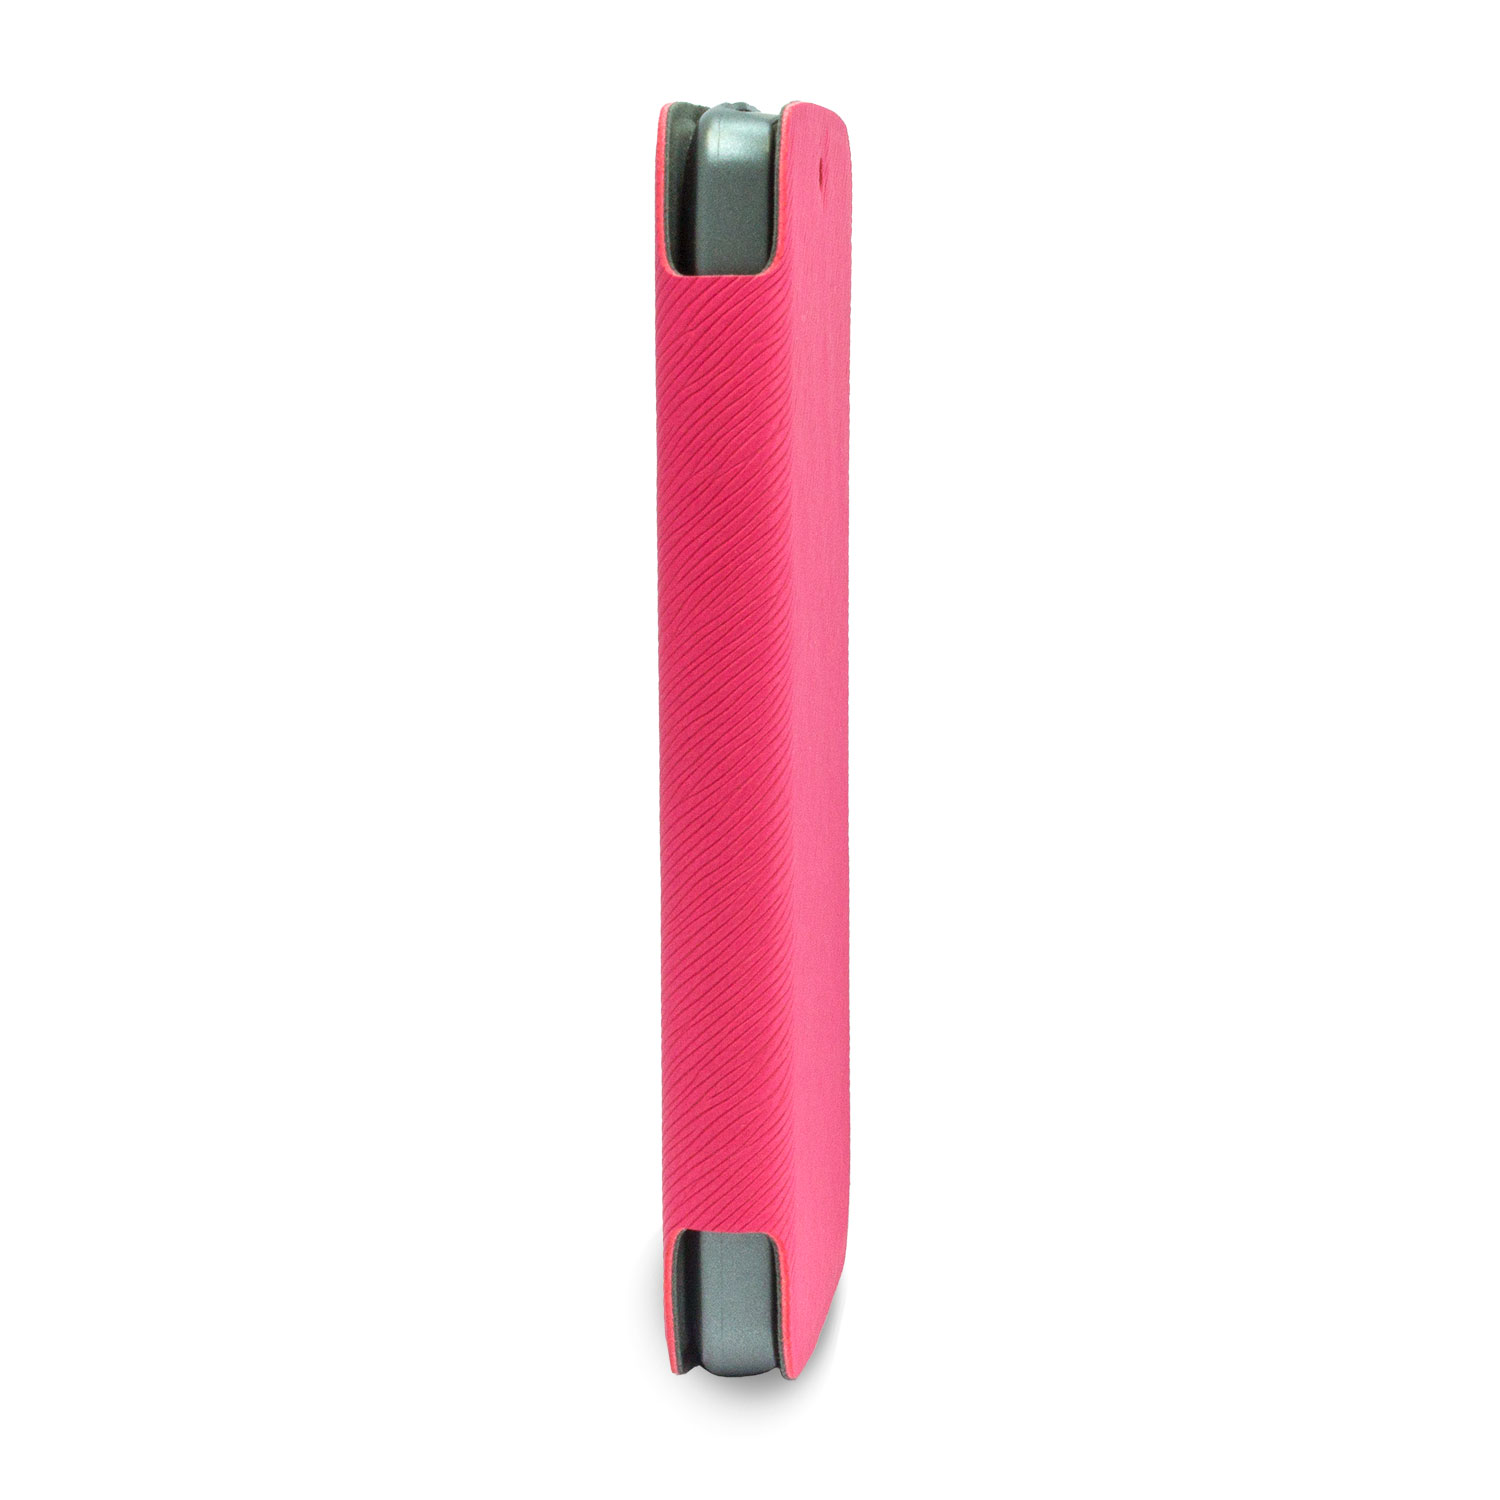 Pudini Stand Case for Nexus 5 - Pink